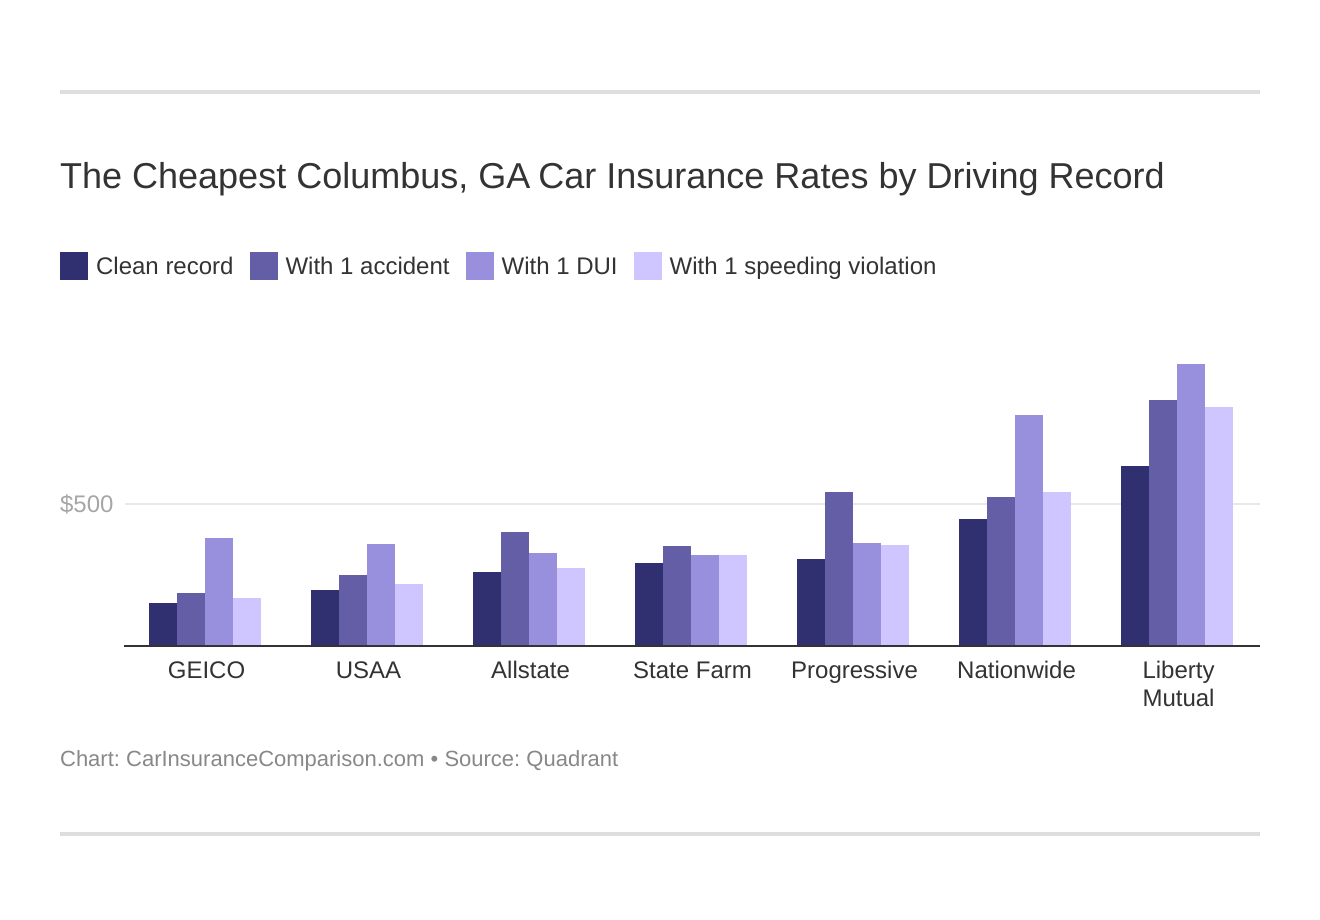 The Cheapest Columbus, GA Car Insurance Rates by Driving Record